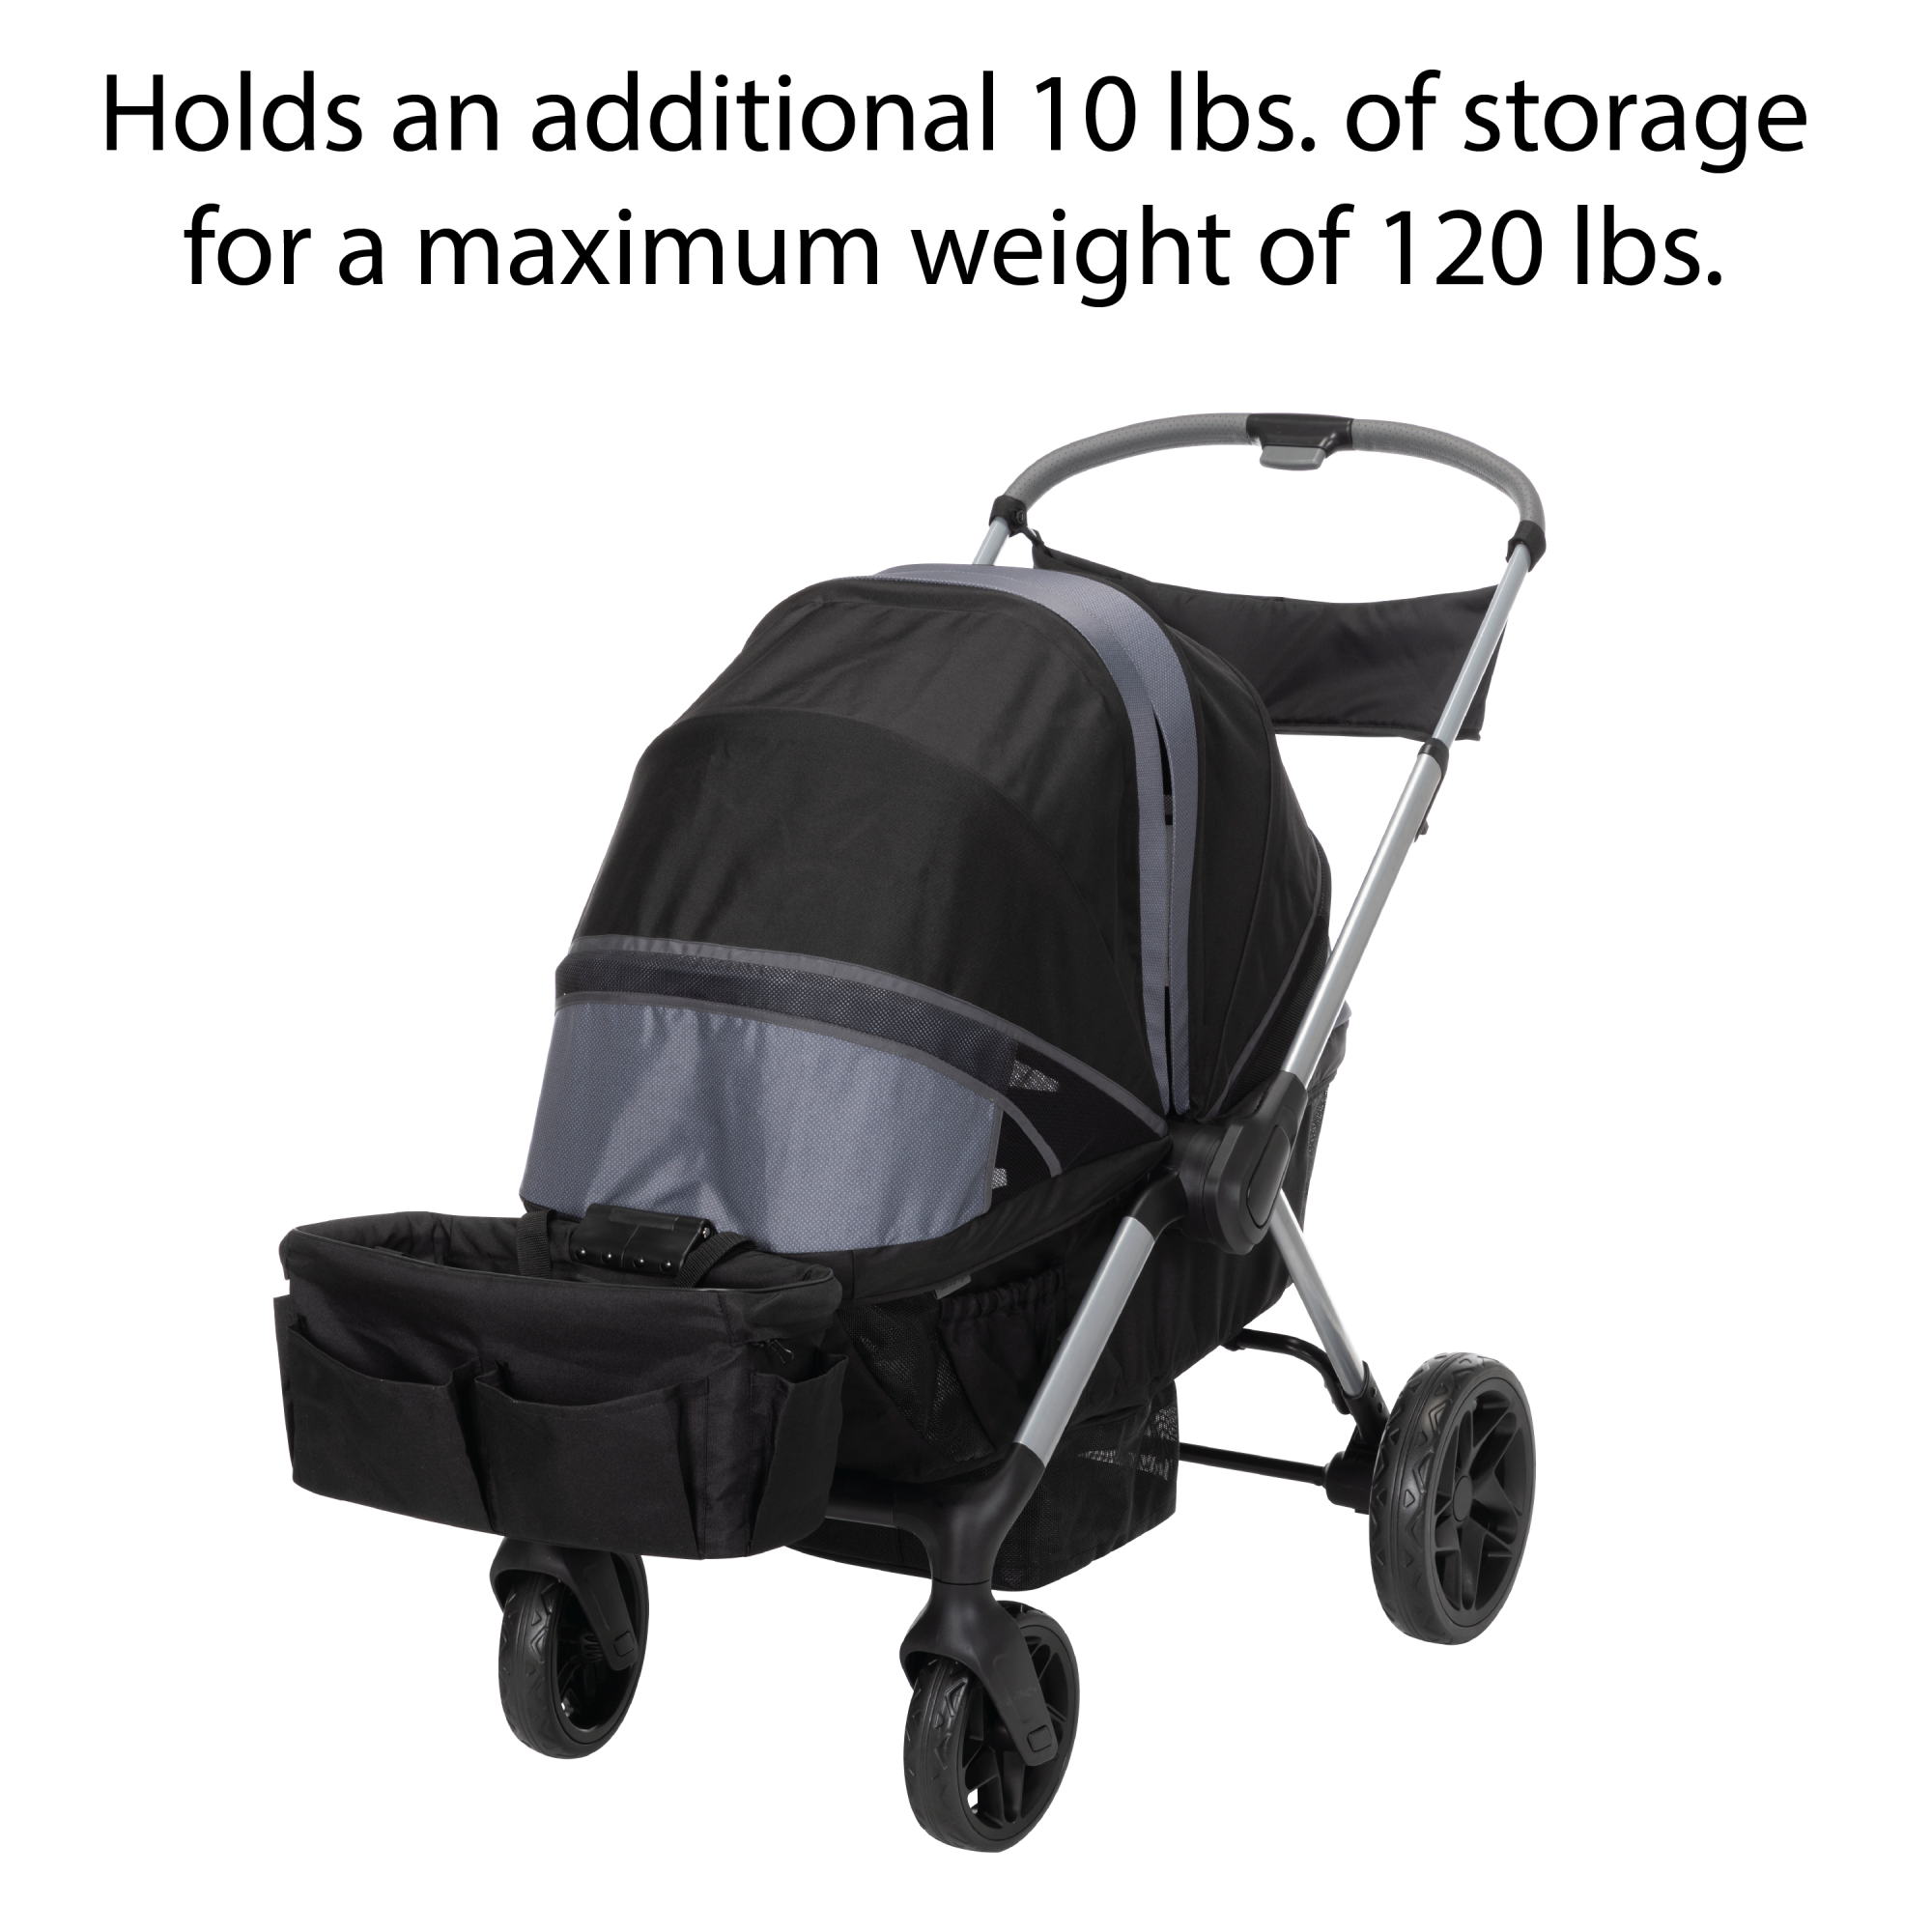 Summit Wagon Stroller - holds an additional 10 lbs. of storage for a maximum weight of 120 lbs.